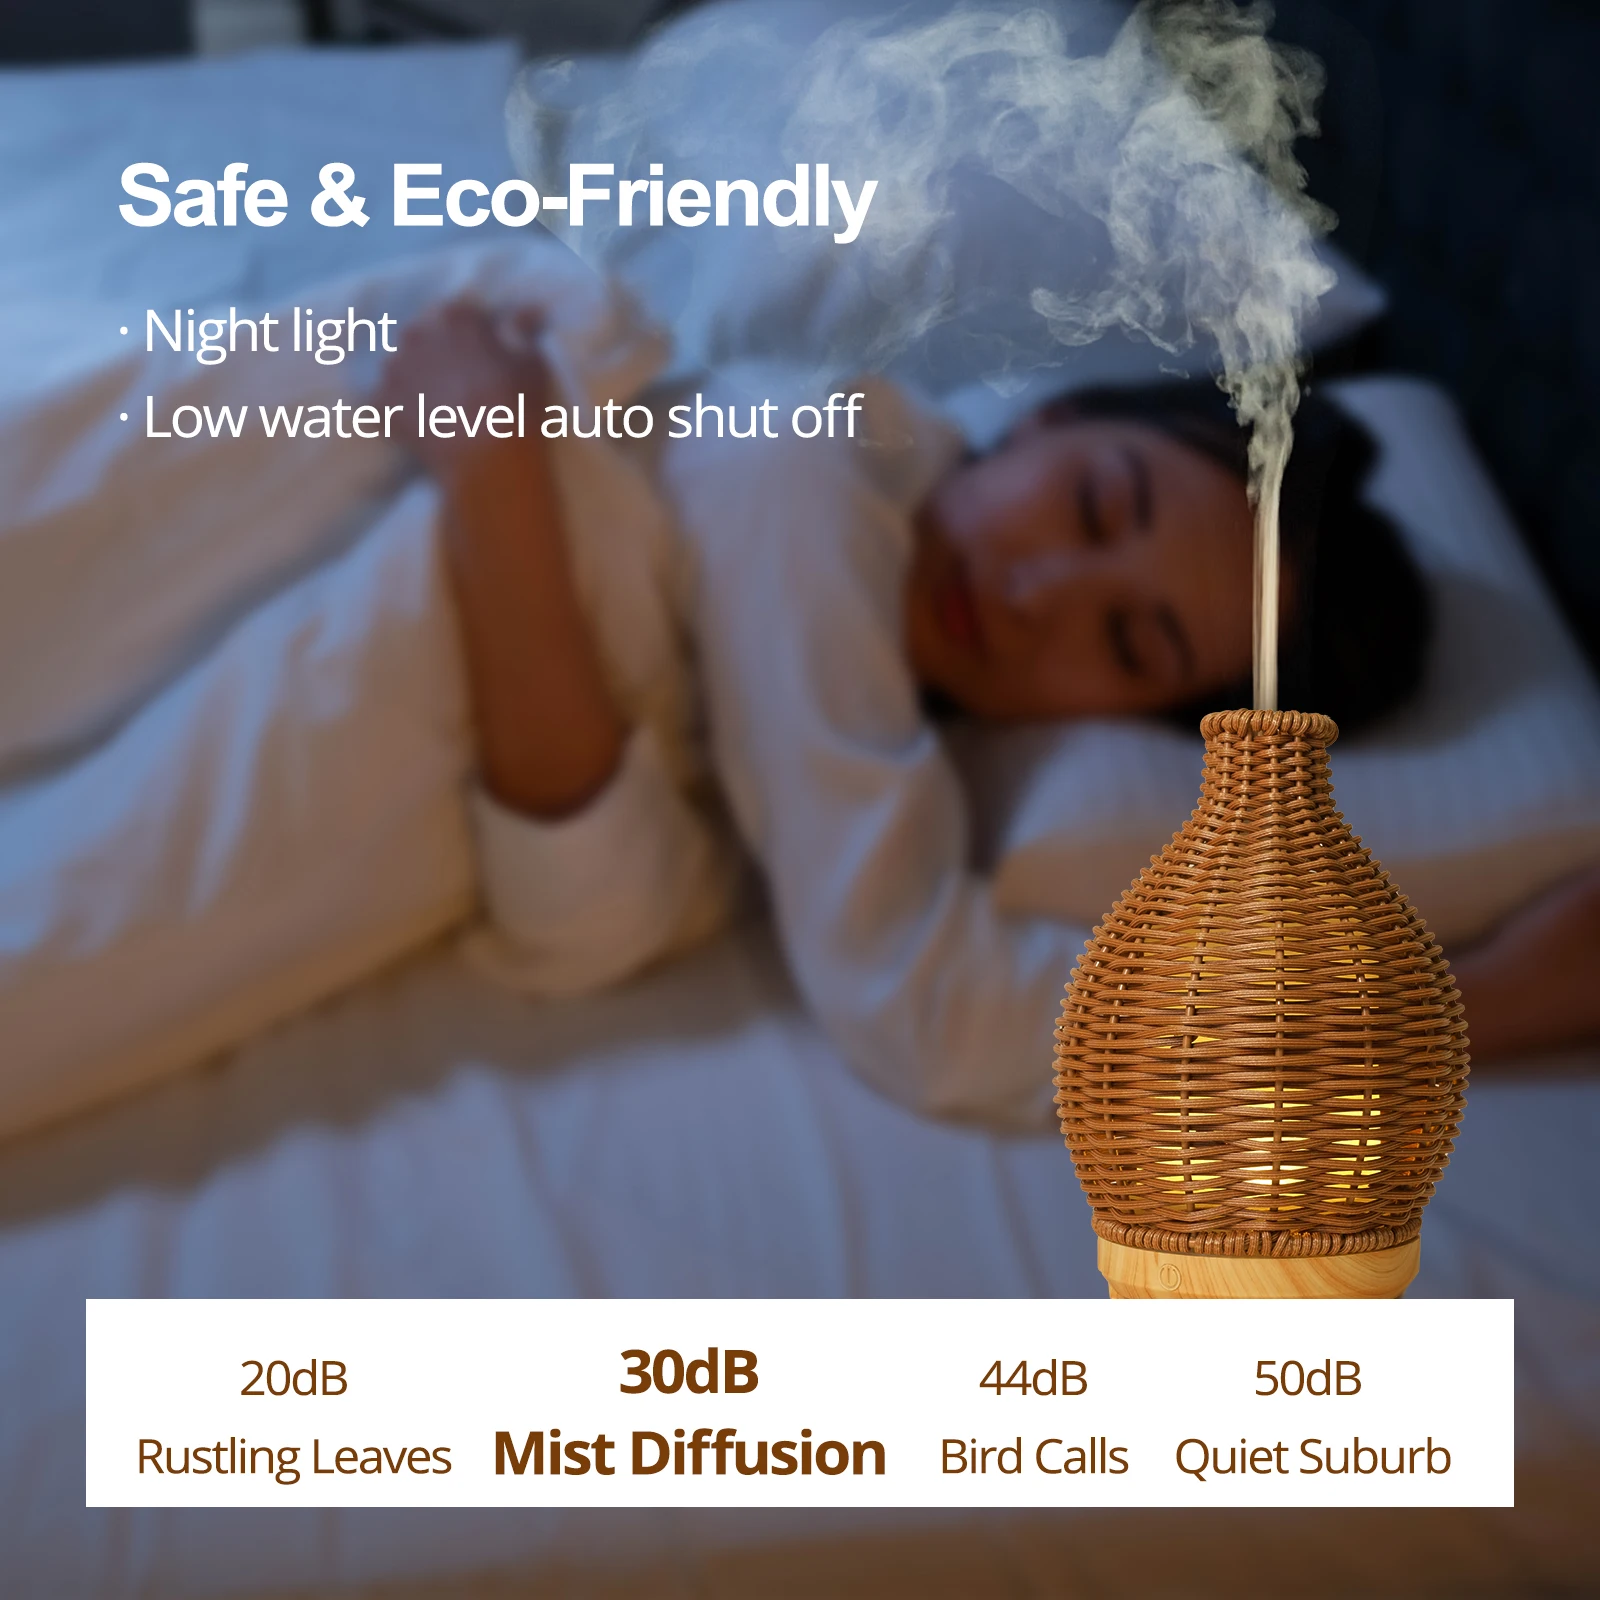 Rattan Weaving Air Humidifiers USB Home and Decoration Vase Shape Fragrance Diffuser Ultrasound Essential Oils Small Appliances